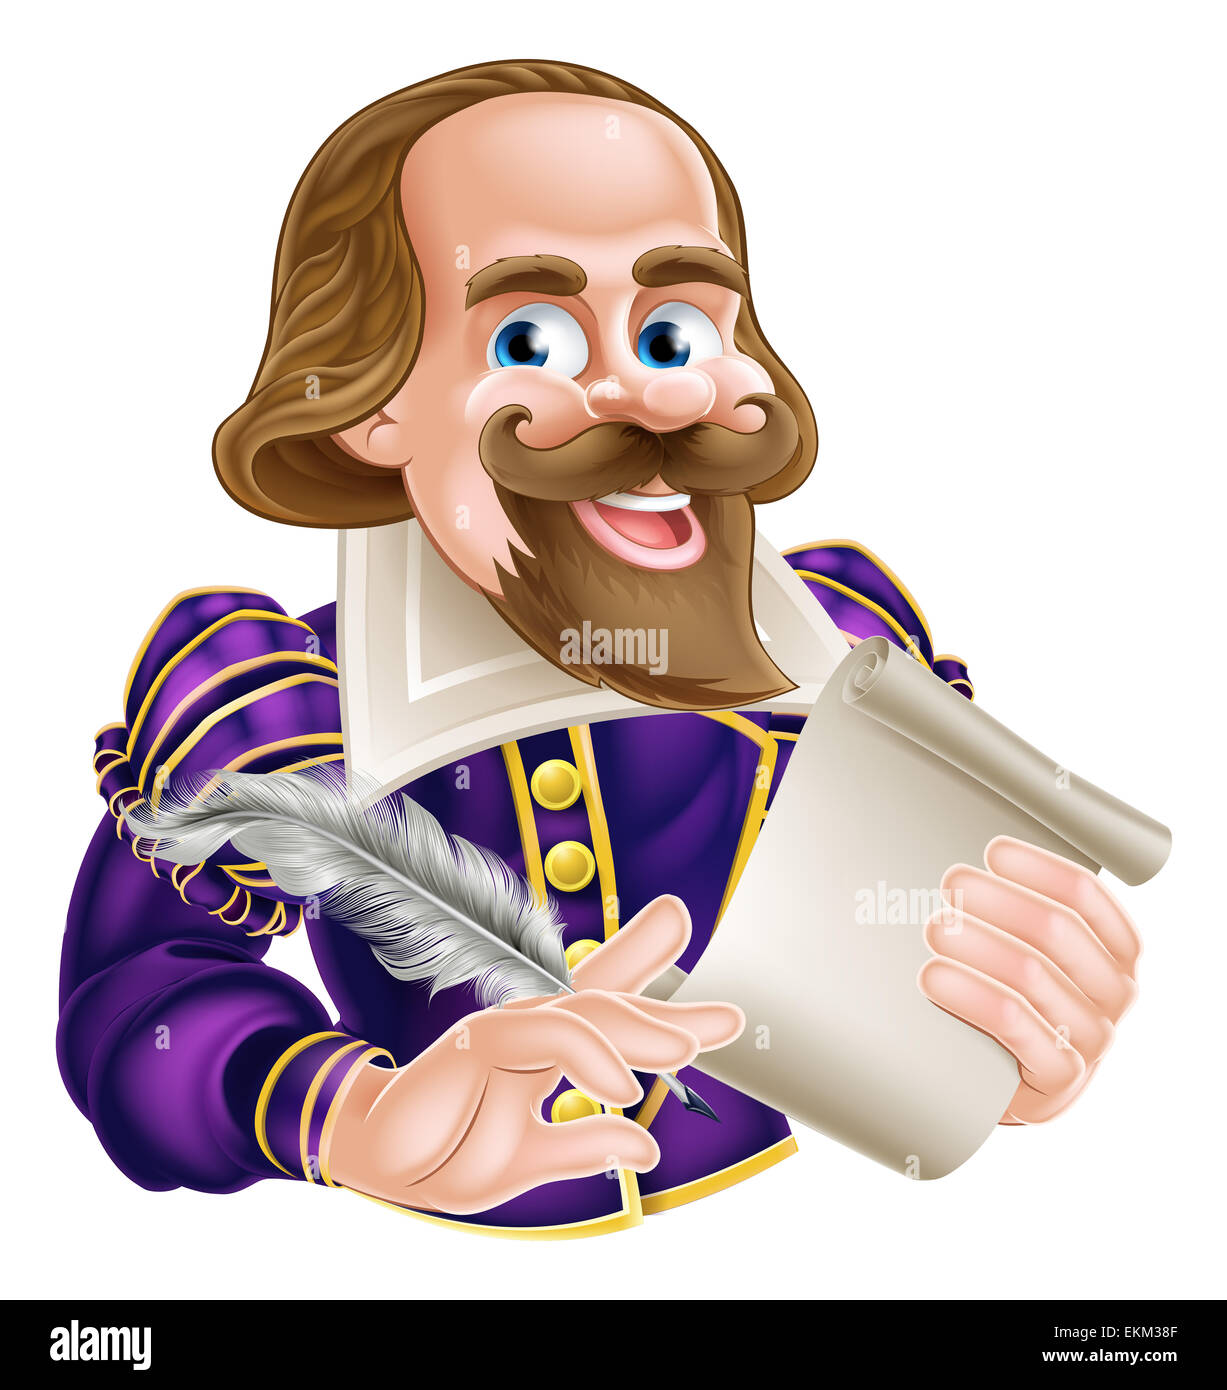 Cartoon of William Shakespeare holding a feather quill and scroll Stock Photo